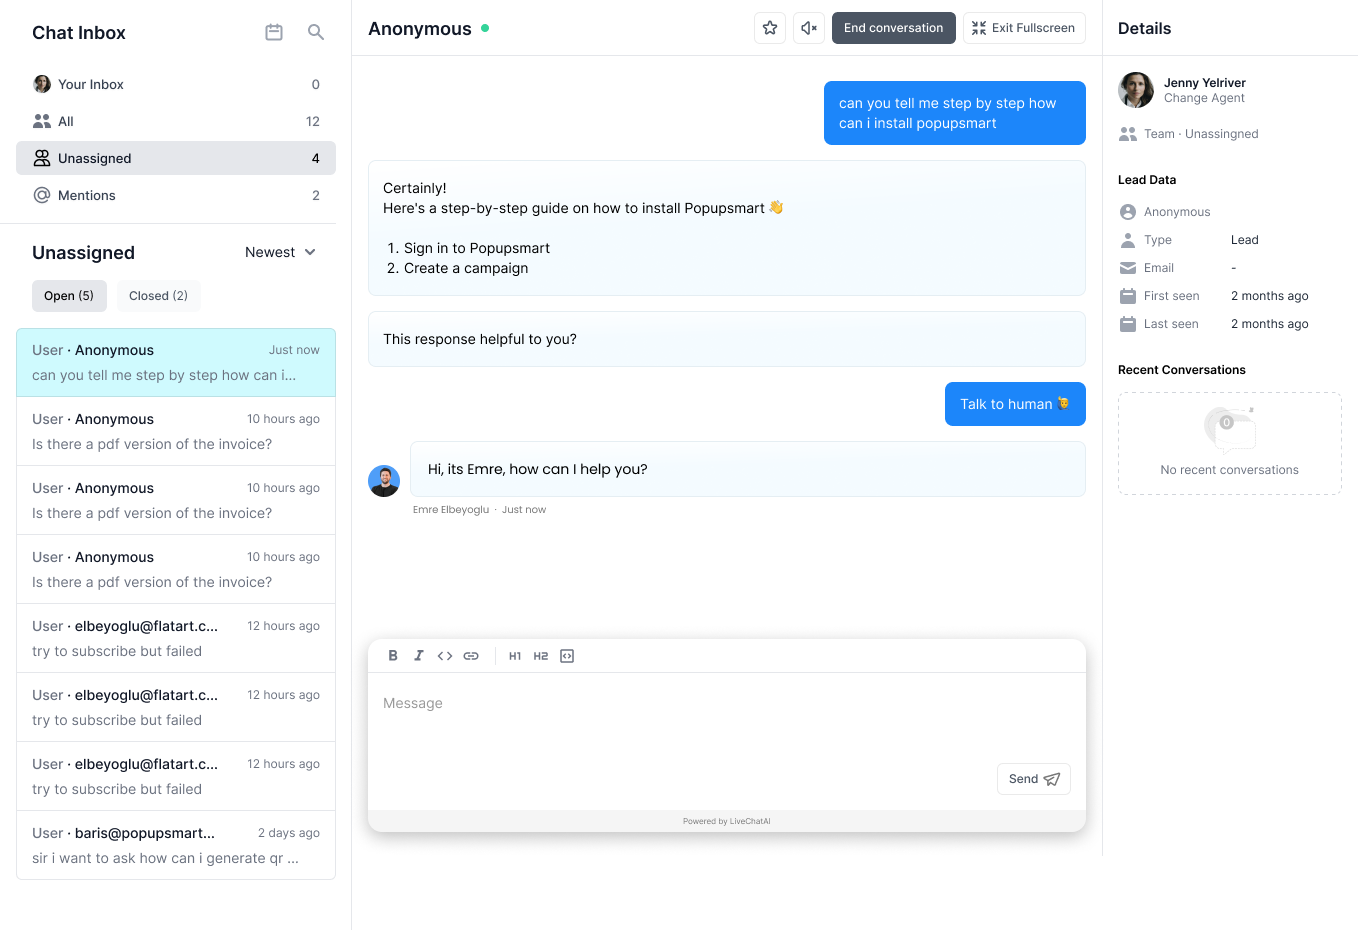 image attachment and new chat ui in Chat Inbox section in LiveChatAI